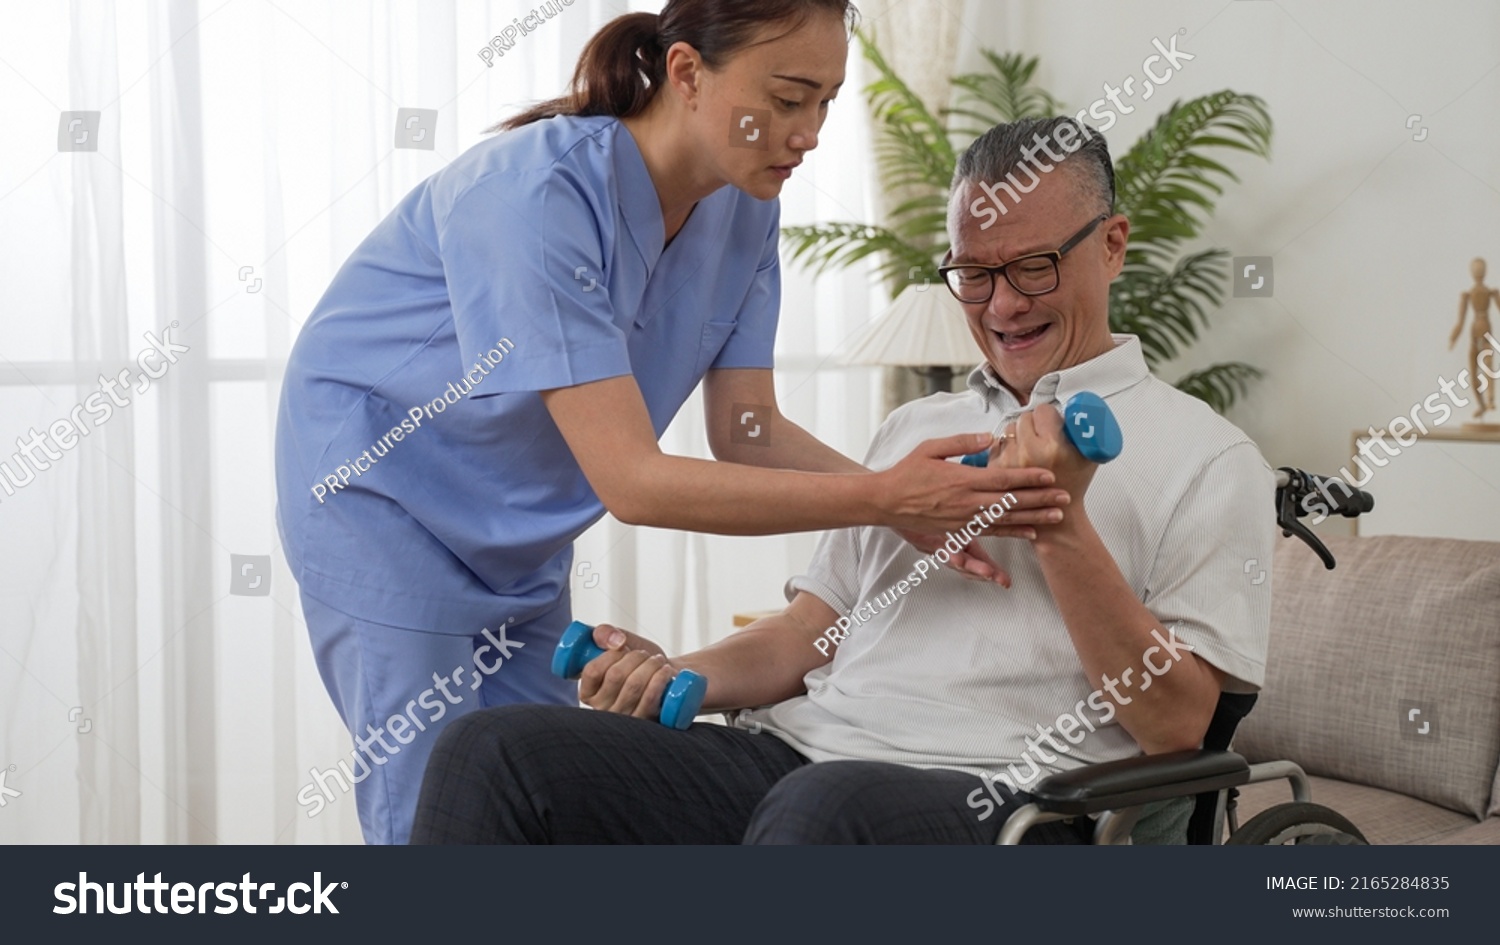 asian paralyzed elderly man sitting in wheelchair and going through physical therapy with personal care attendant’s support. he does weight lifting using dumbbells at home #2165284835